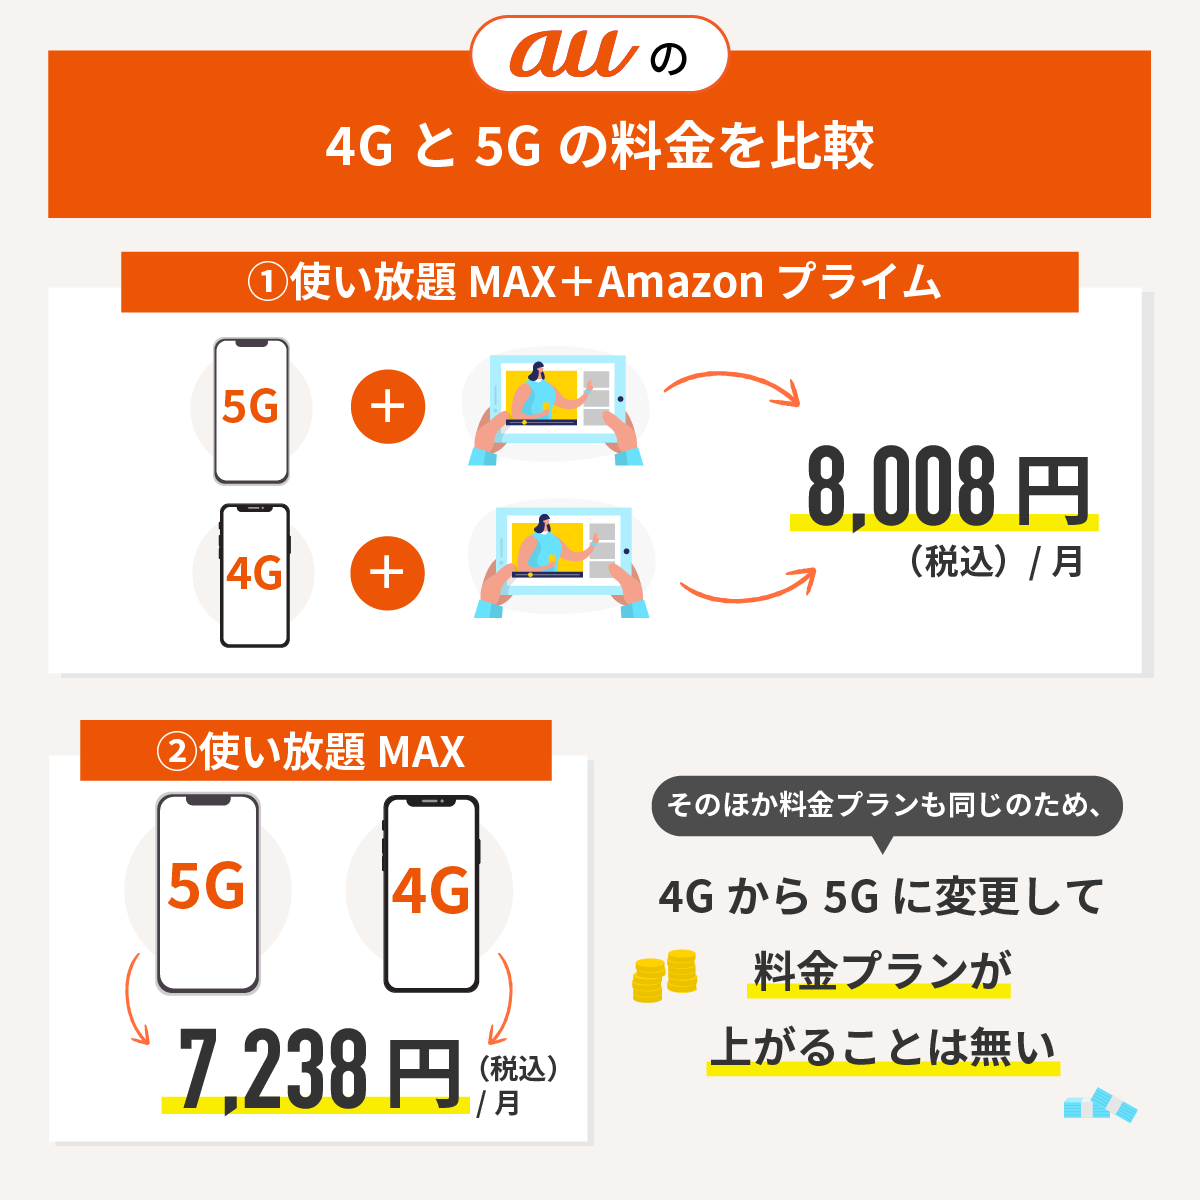 auの4Gと5Gの料金を比較